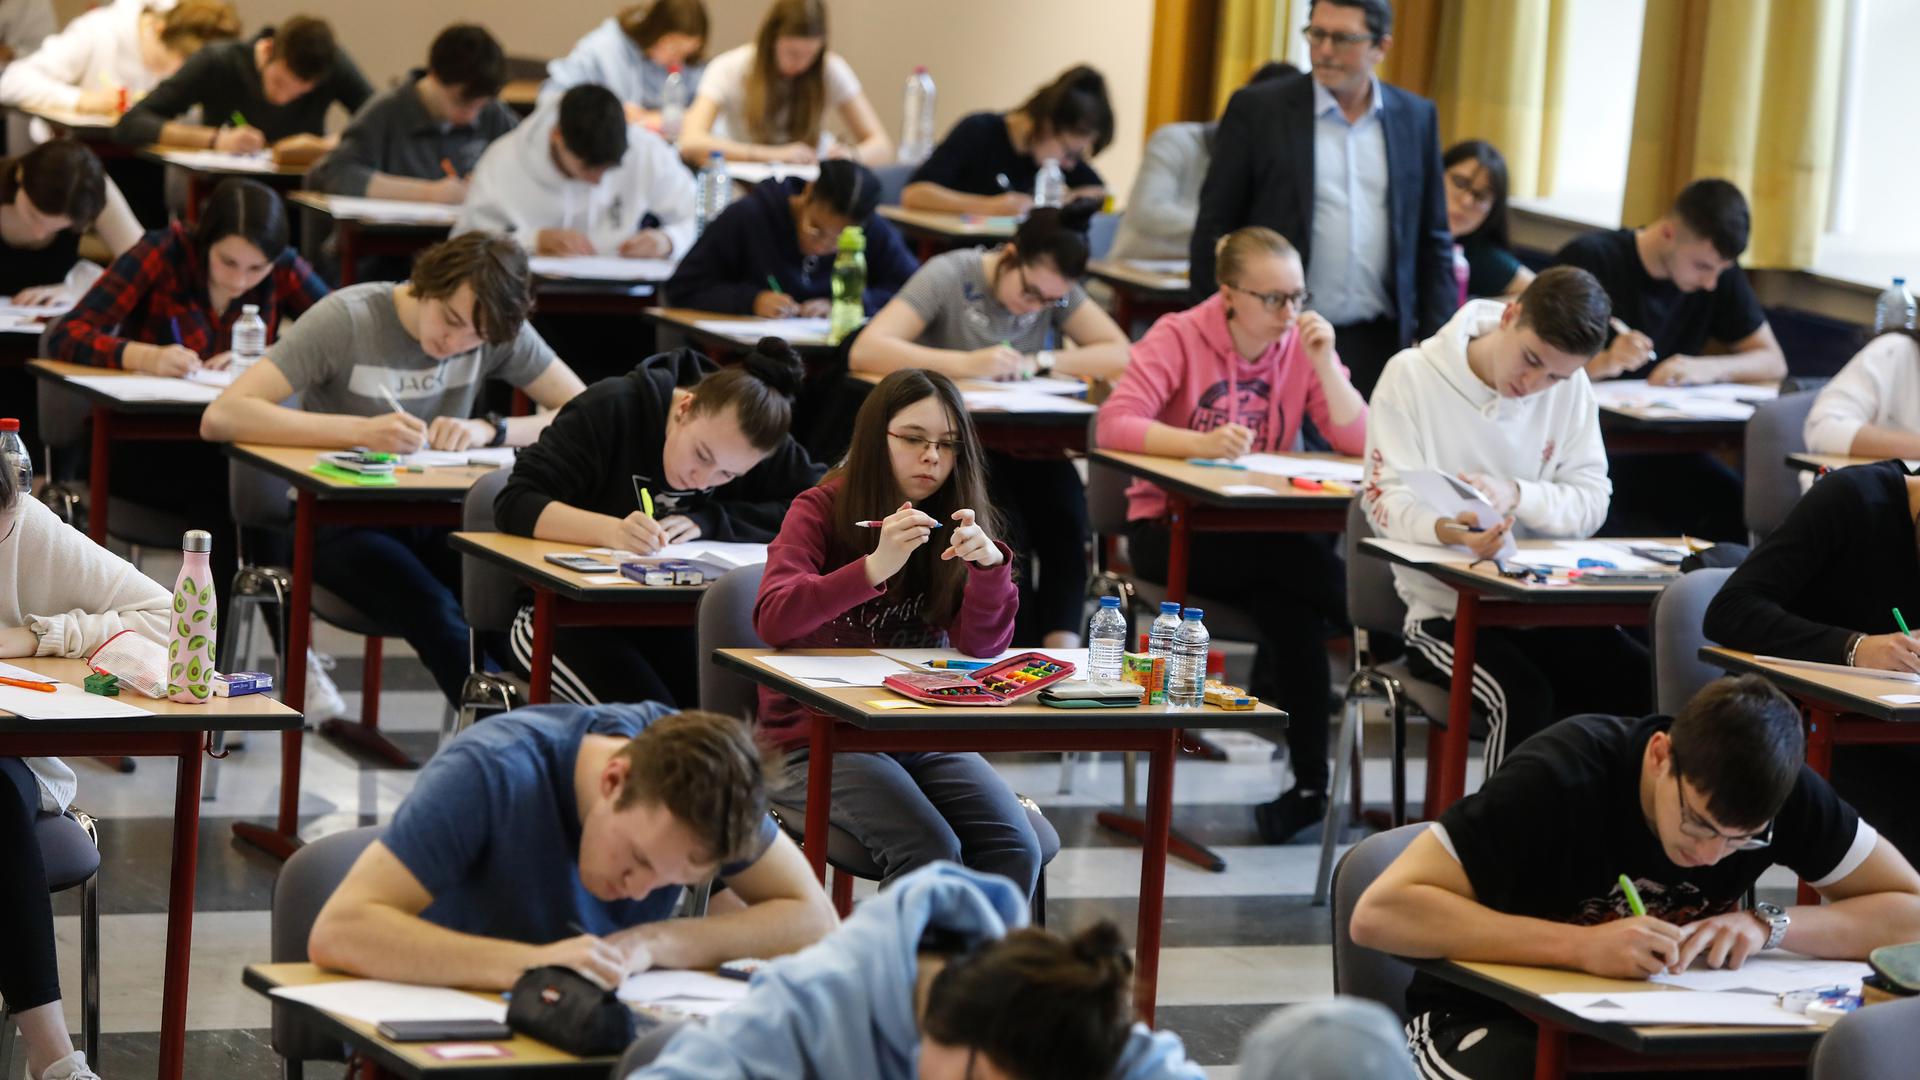 European, International or Luxembourgish Baccalaureate? How does each system work